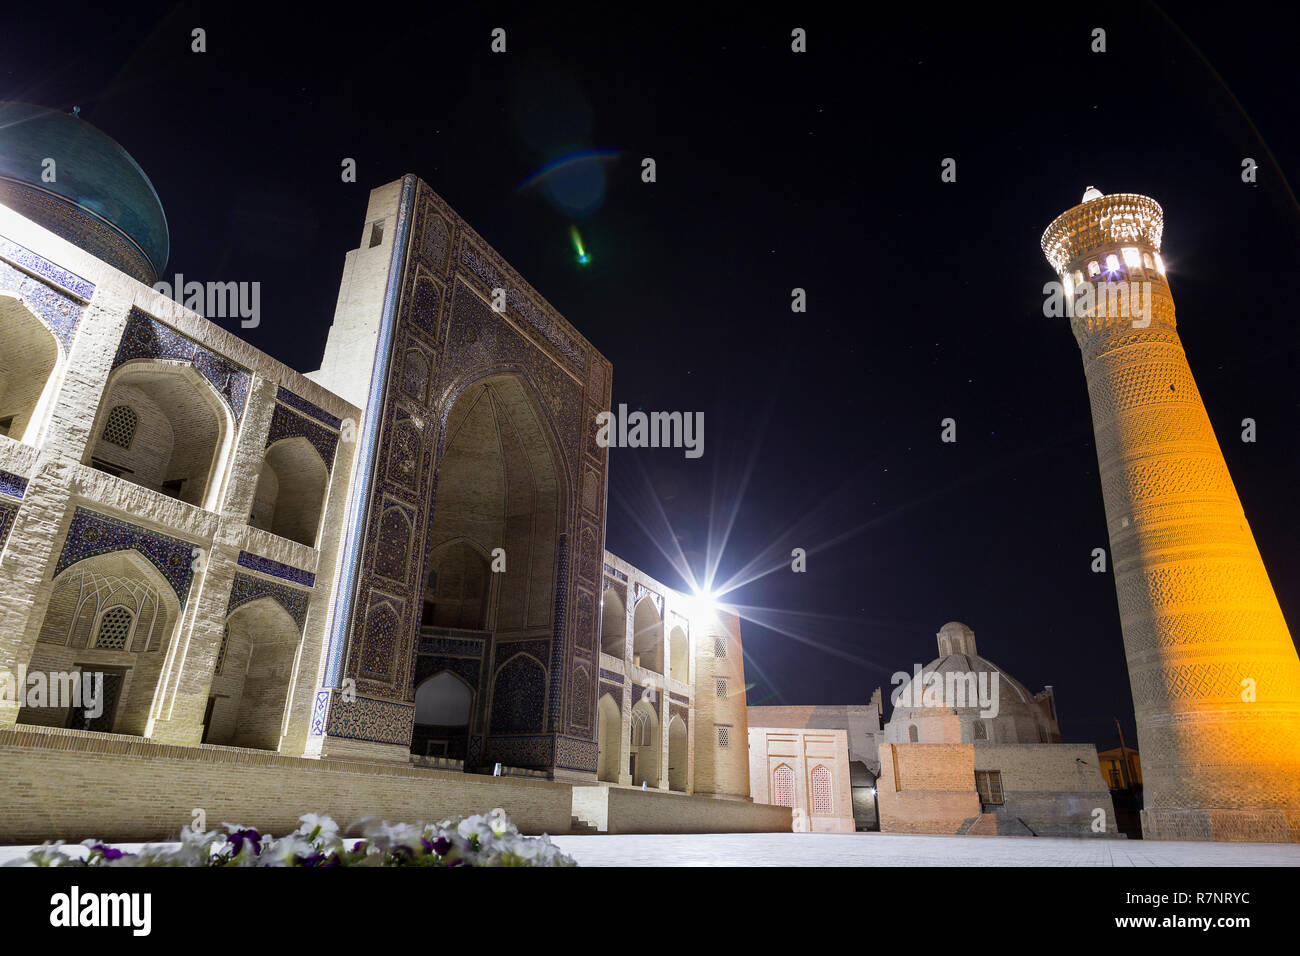 Night photo shoot of ancient buildings in the old town of Bukhara, Central Asia. Kalyan minaret of Poi Kalyan the Islamic religious complex in Bukhara Stock Photo